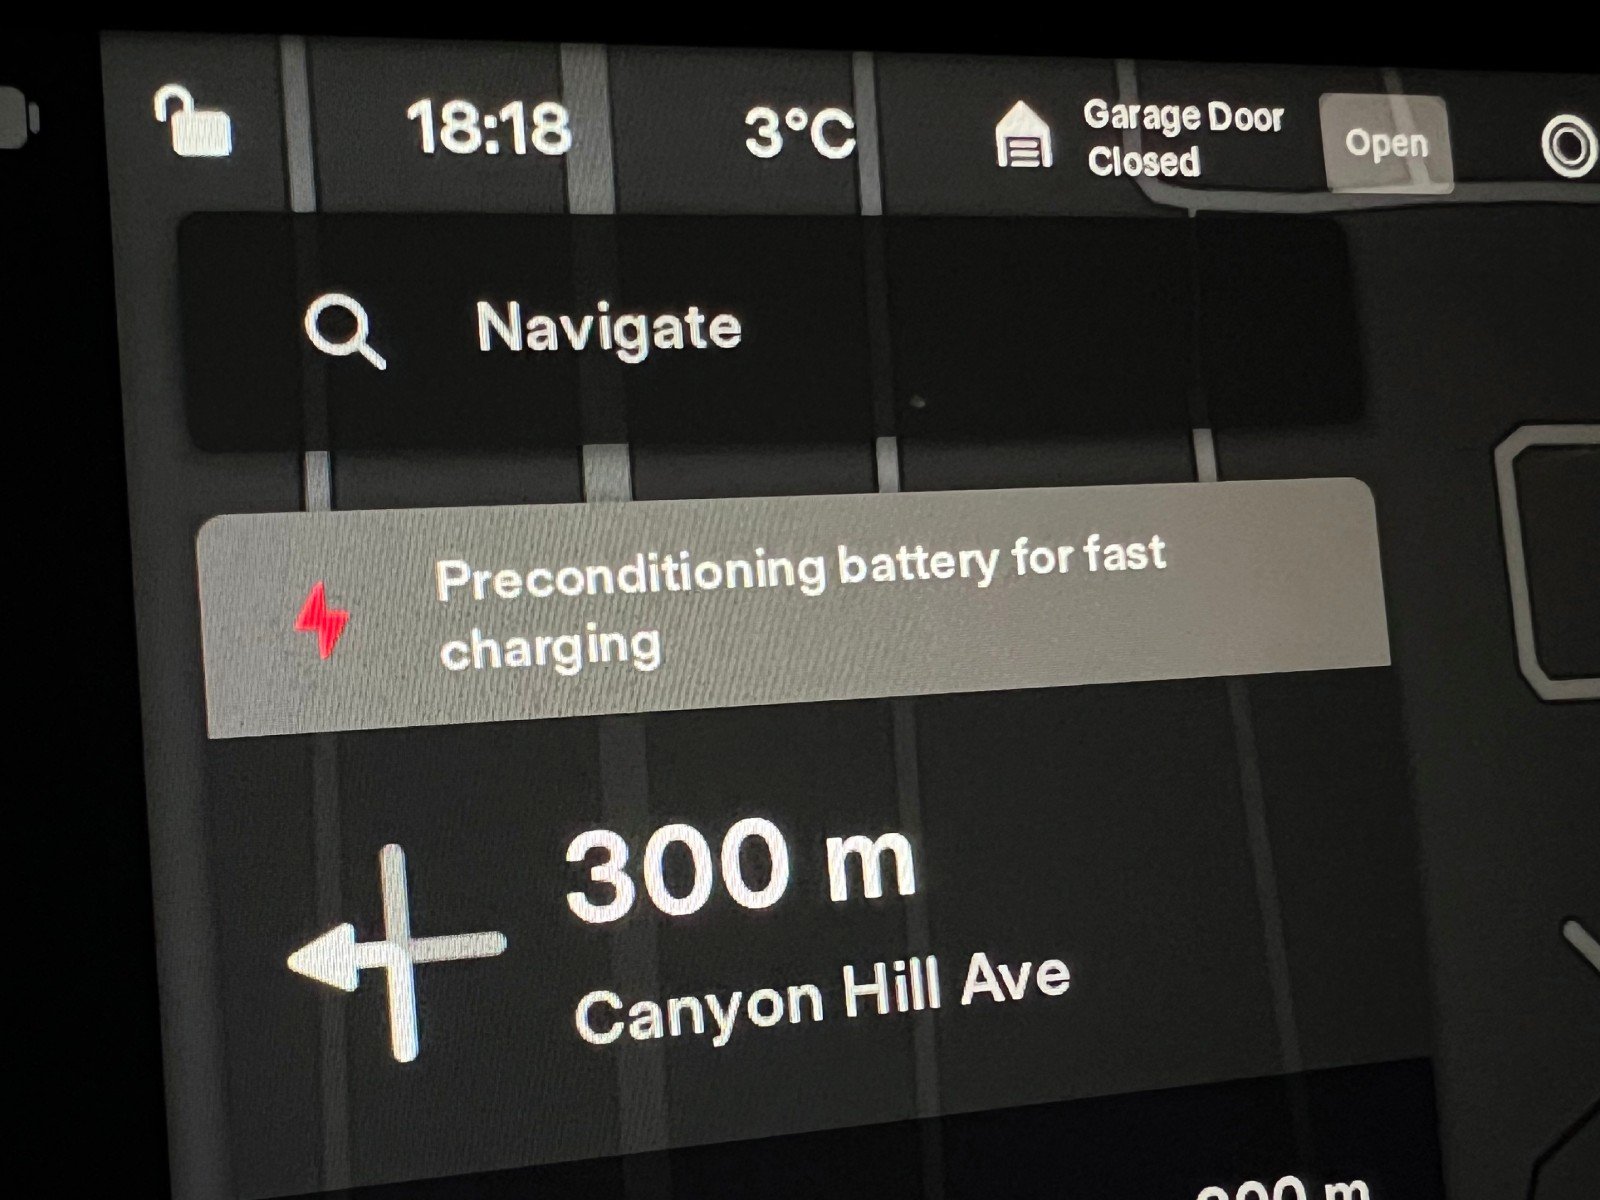 Tesla battery preconditioning message on the screen